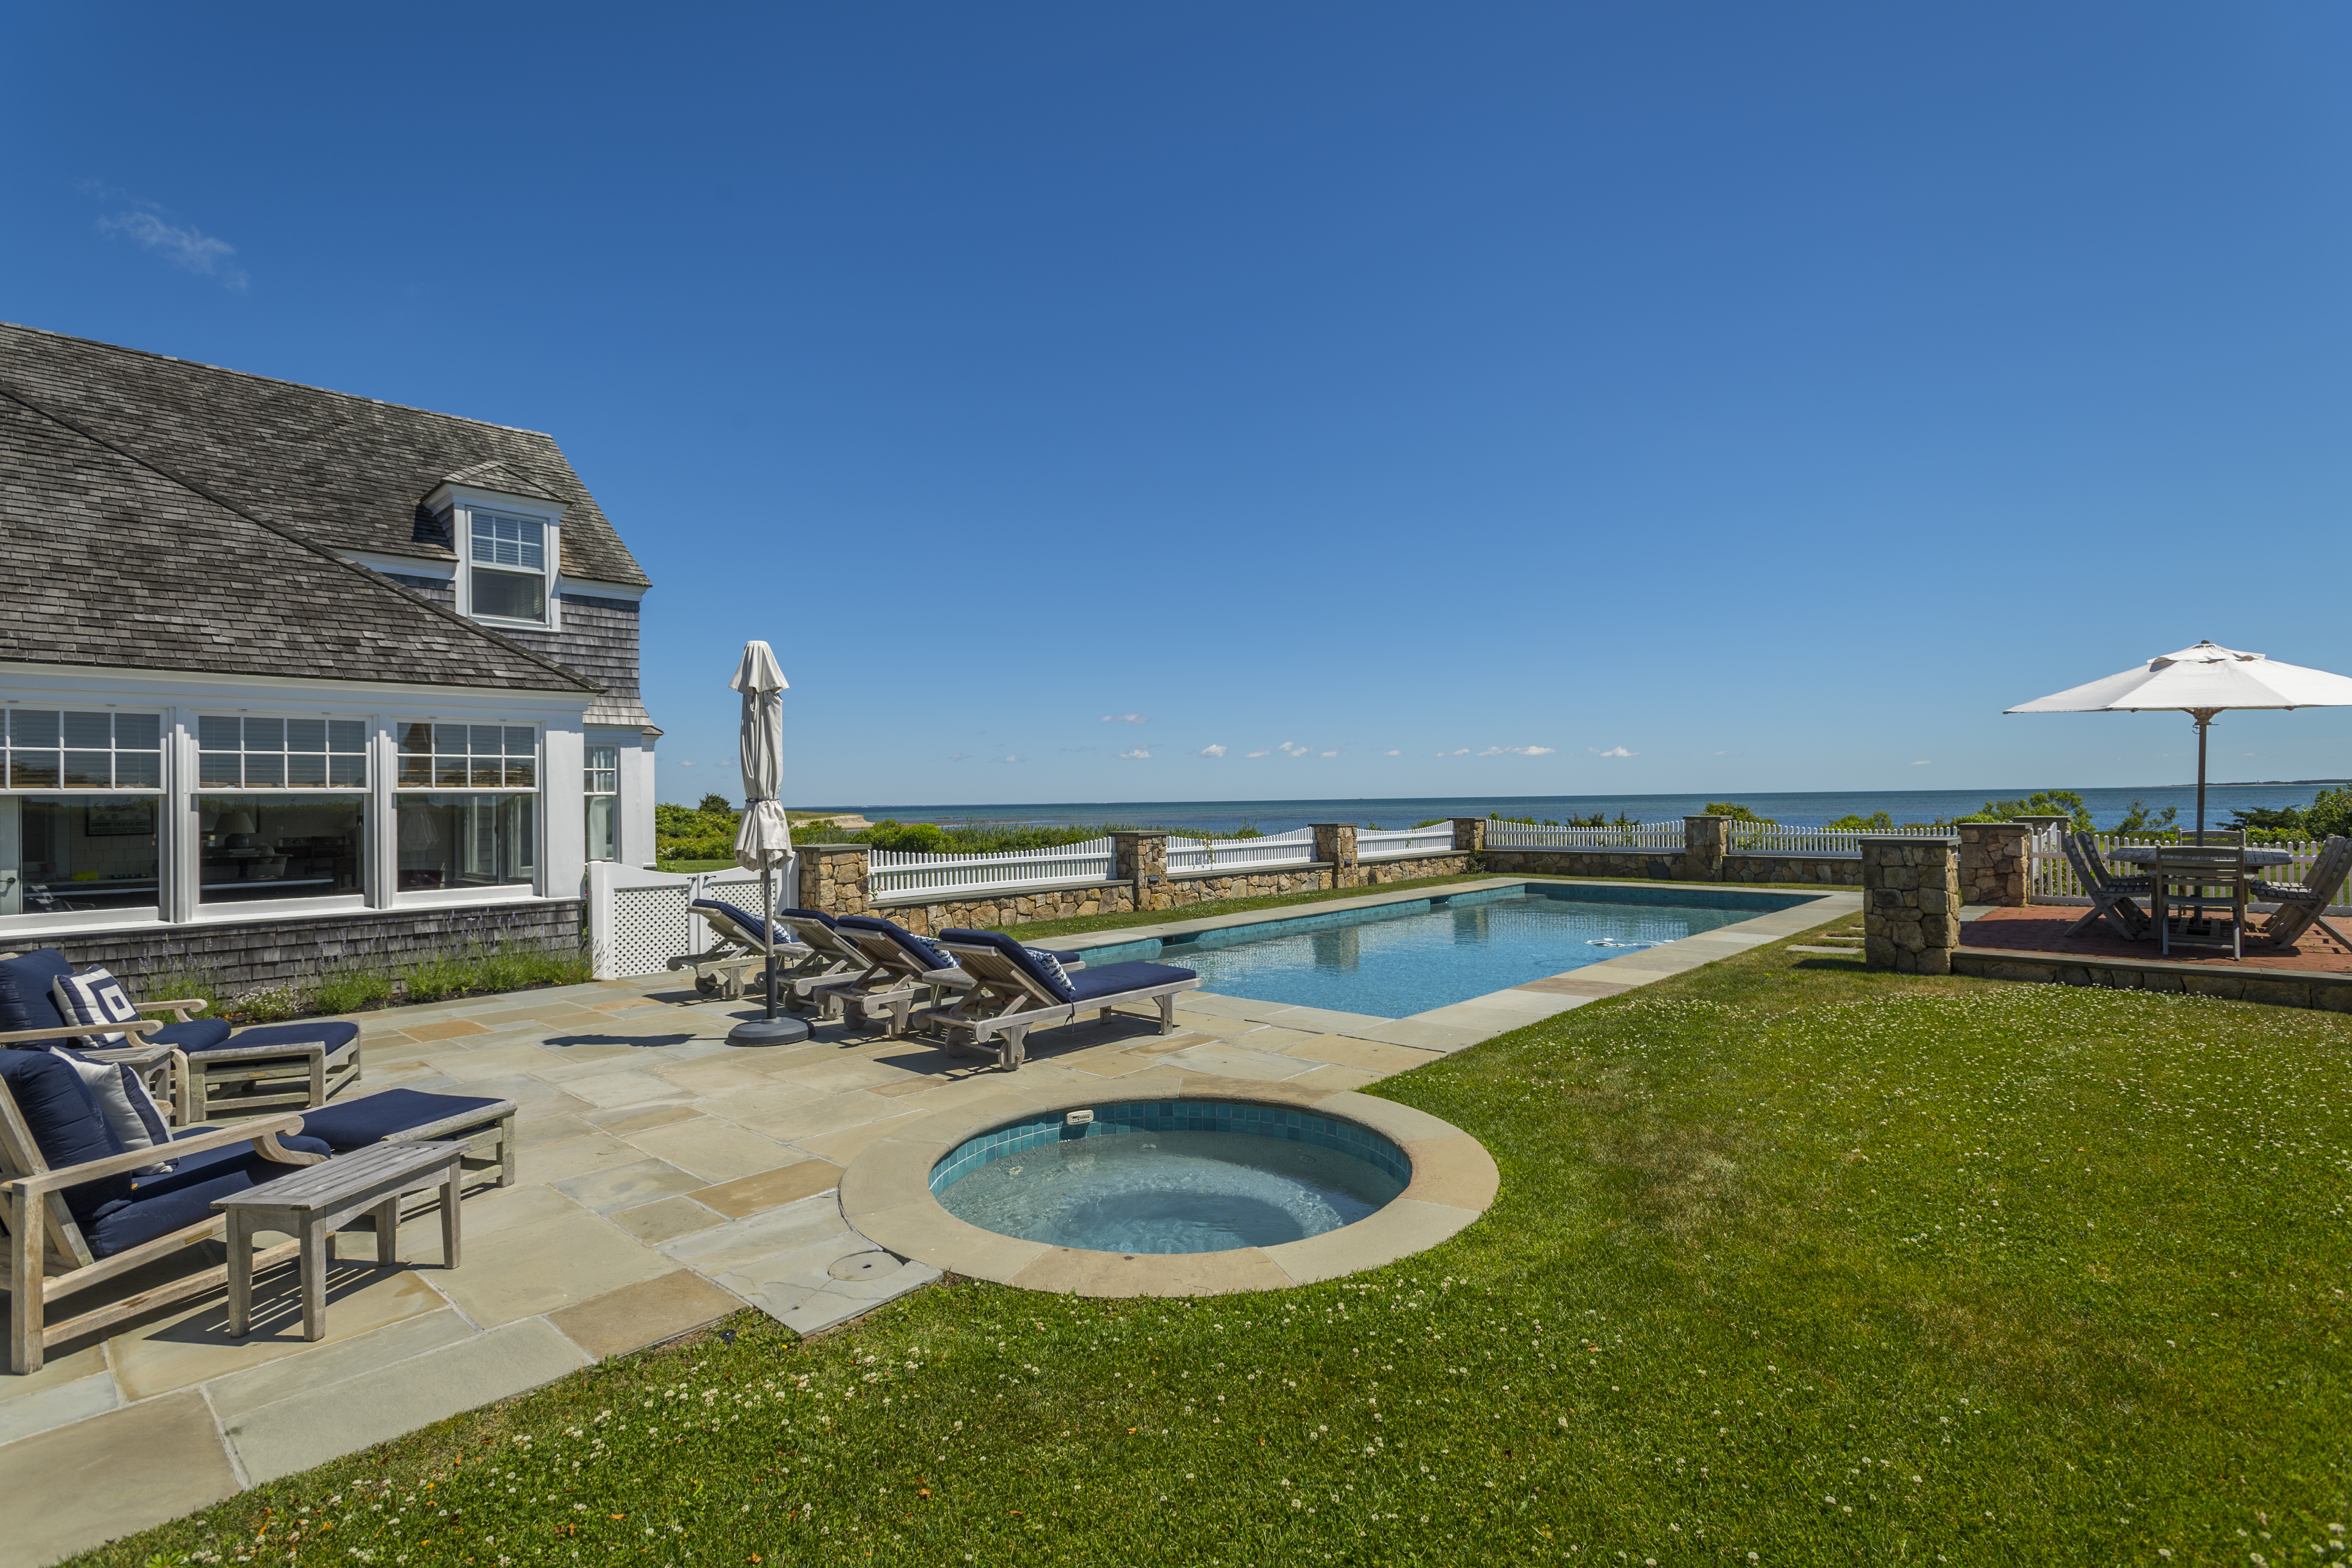 edgartown house with pool